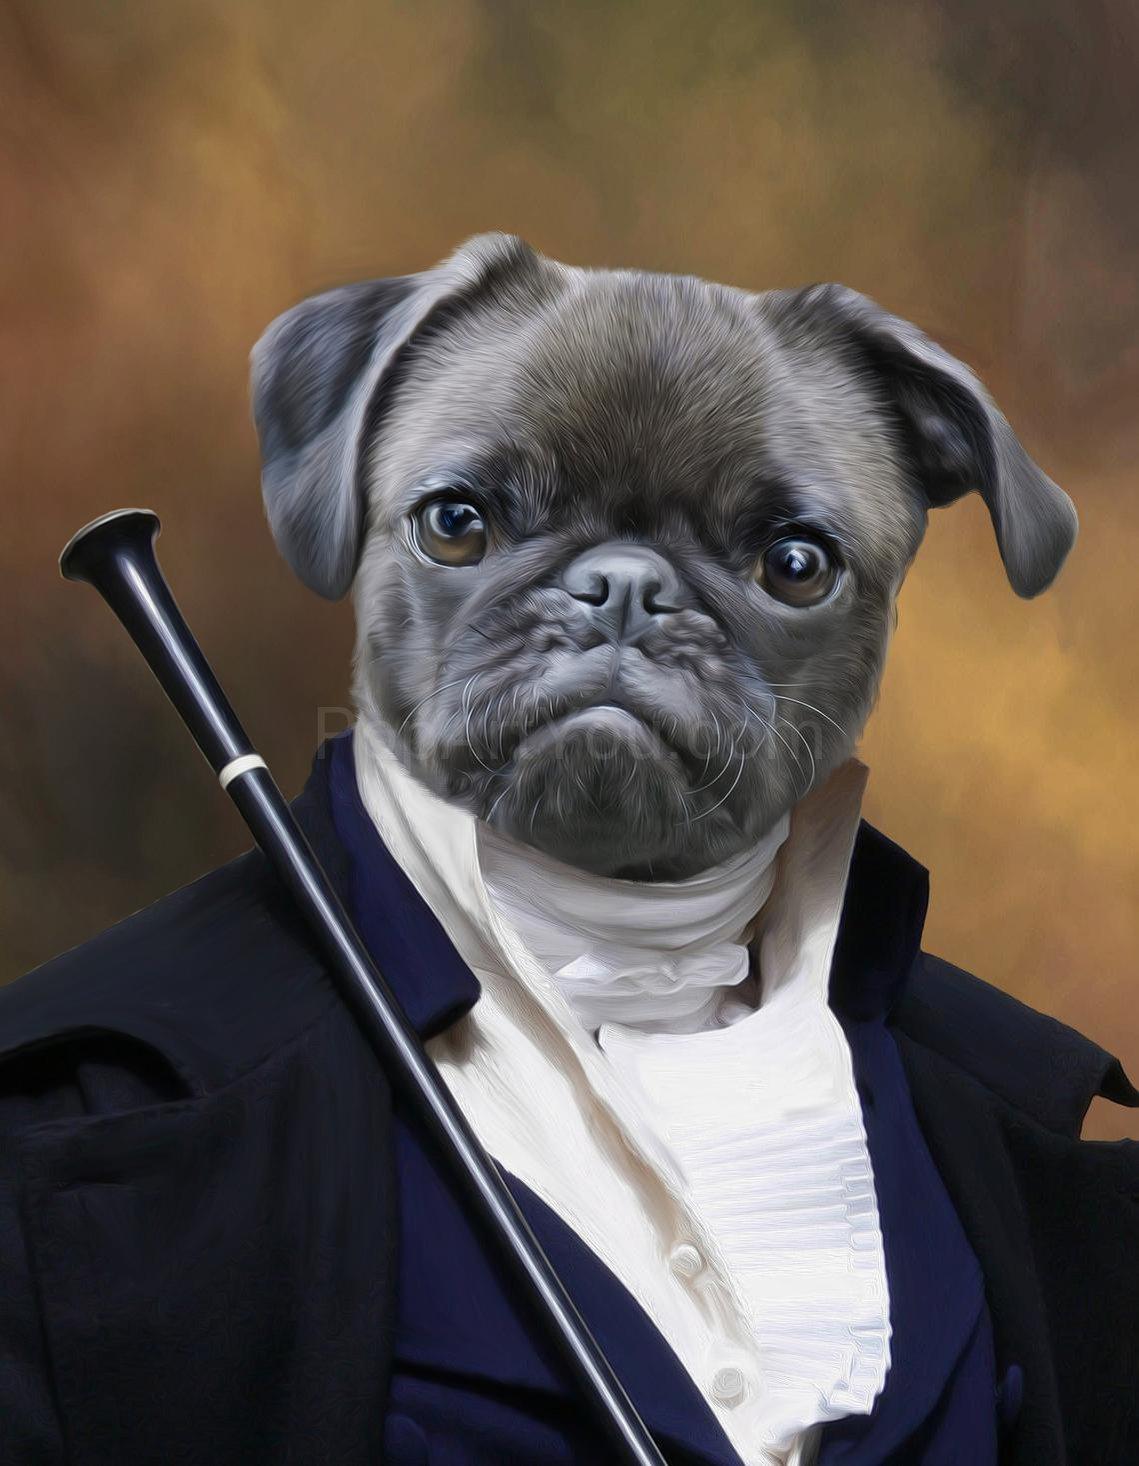 Canvas portrait of a pug head on a human body in historical attire with a cane